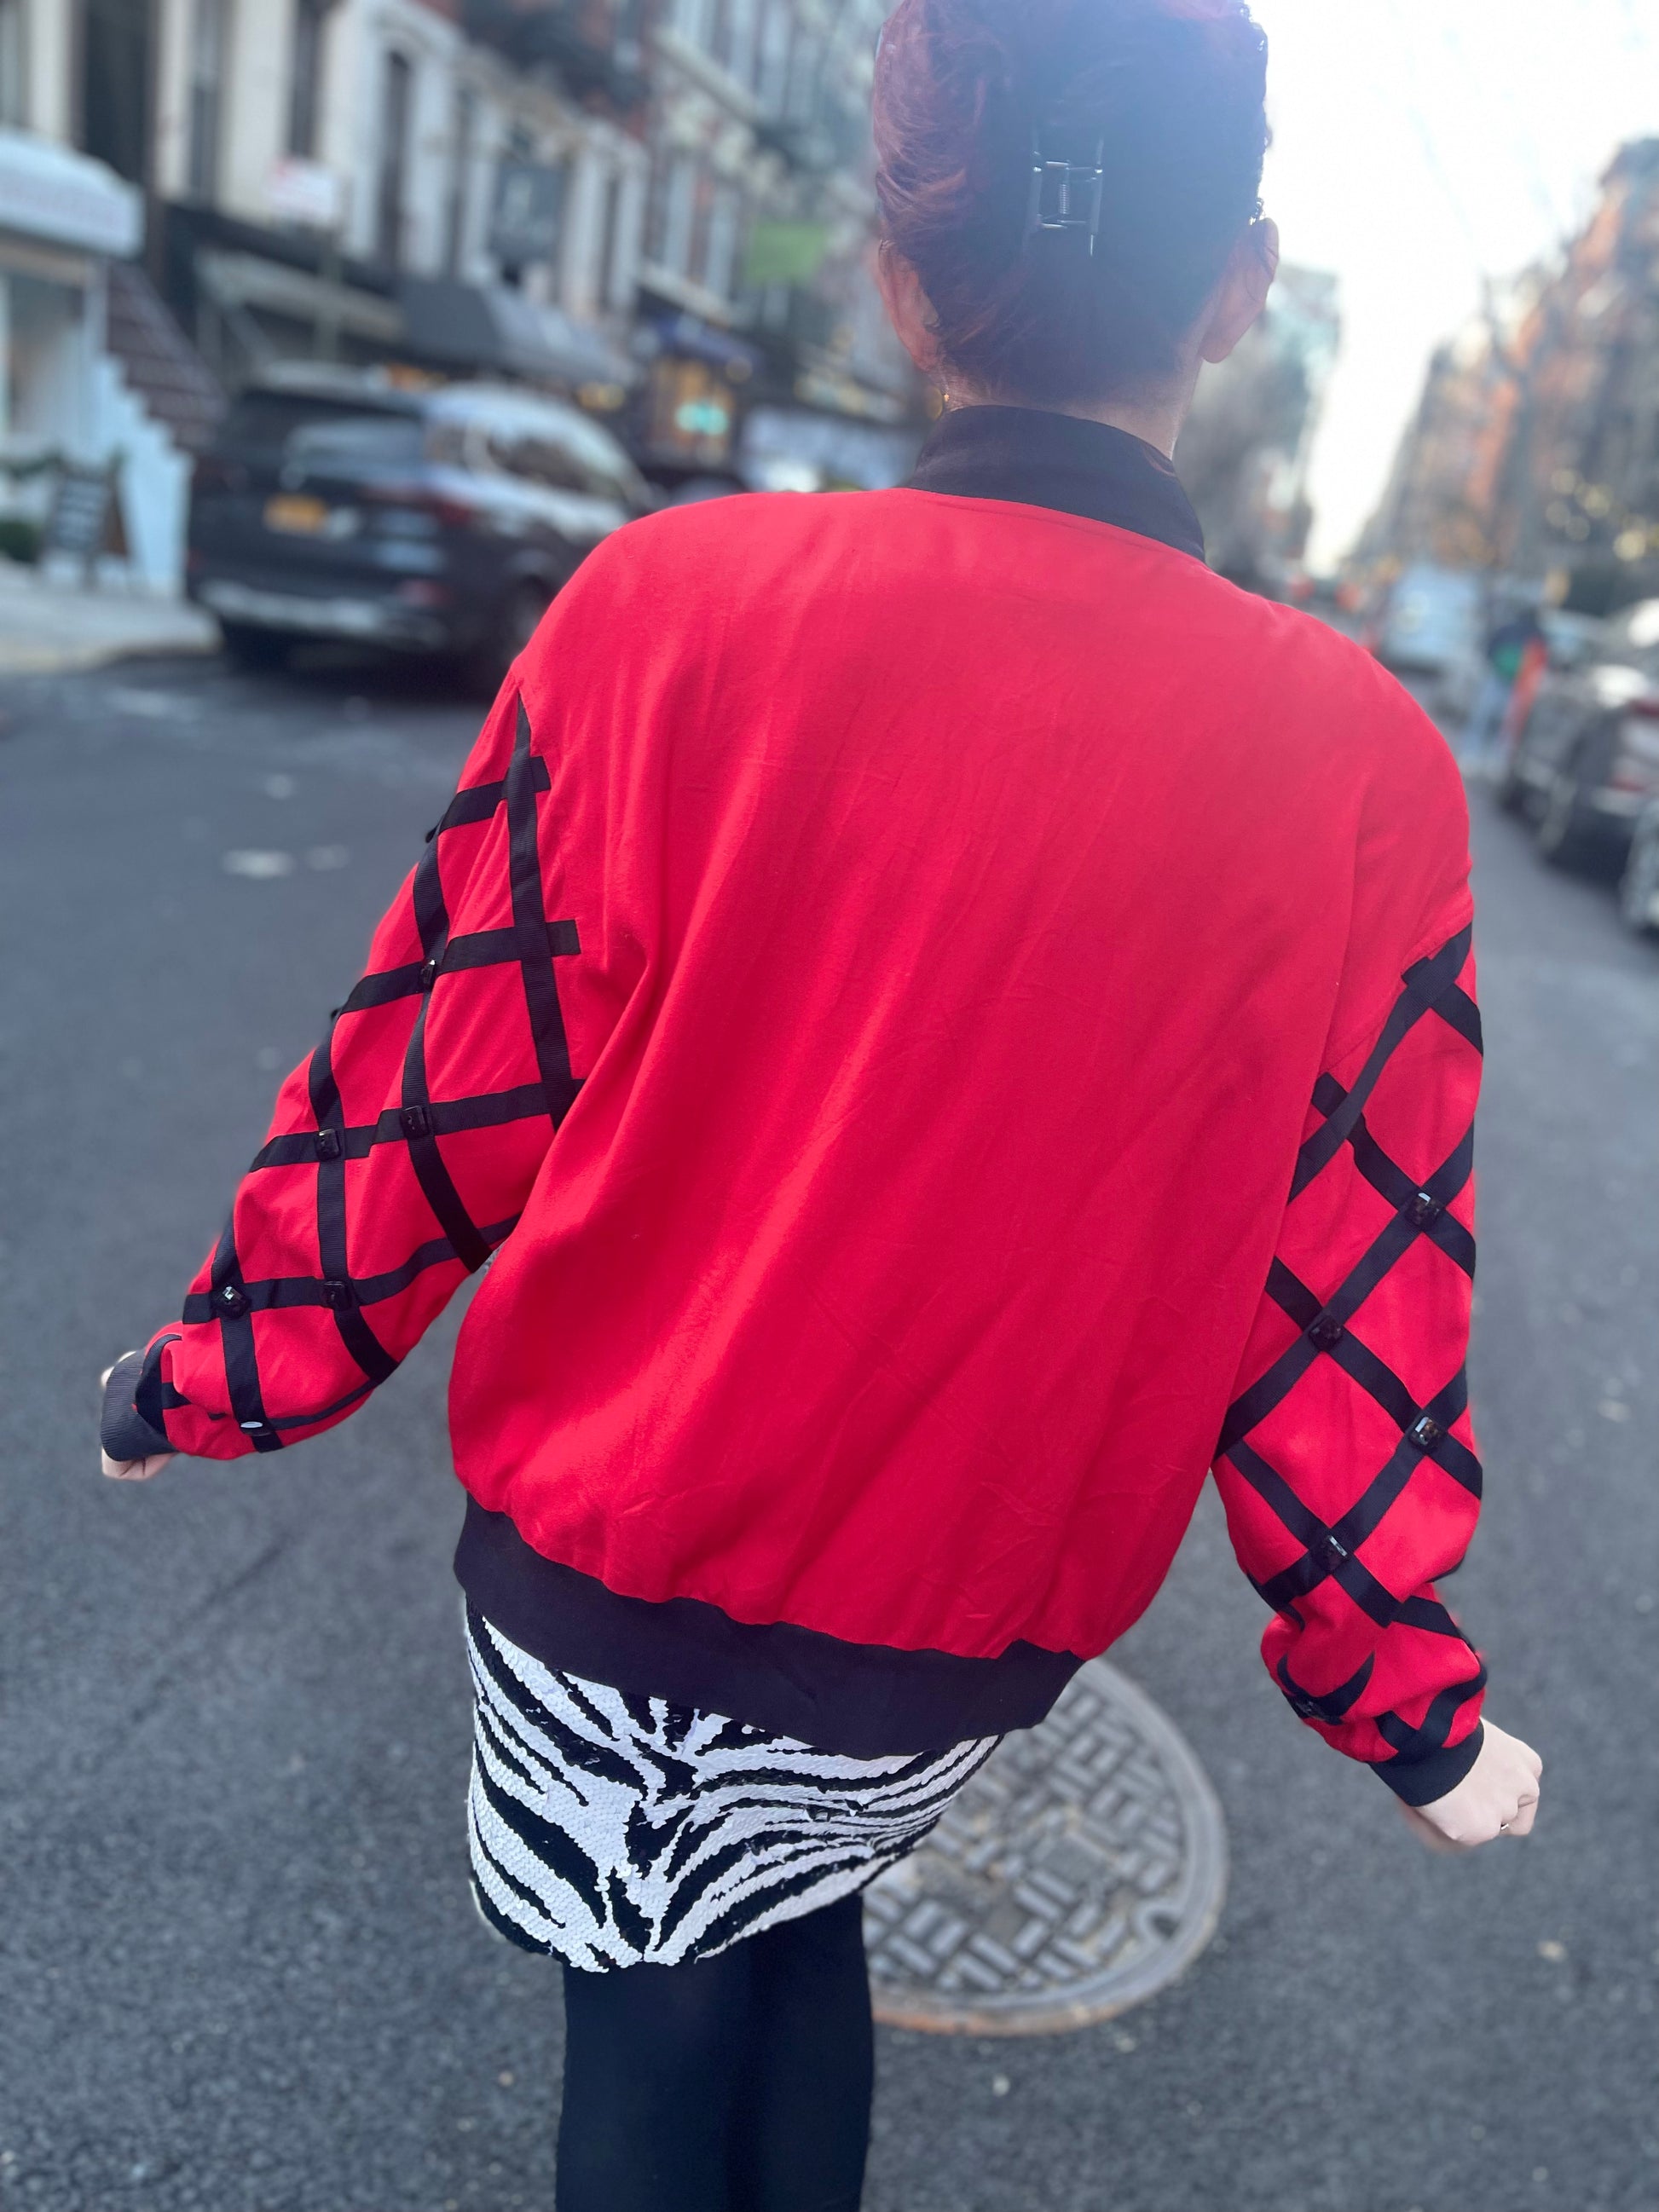 Vintage 80s Red and Black Bomber Jacket - Spark Pretty